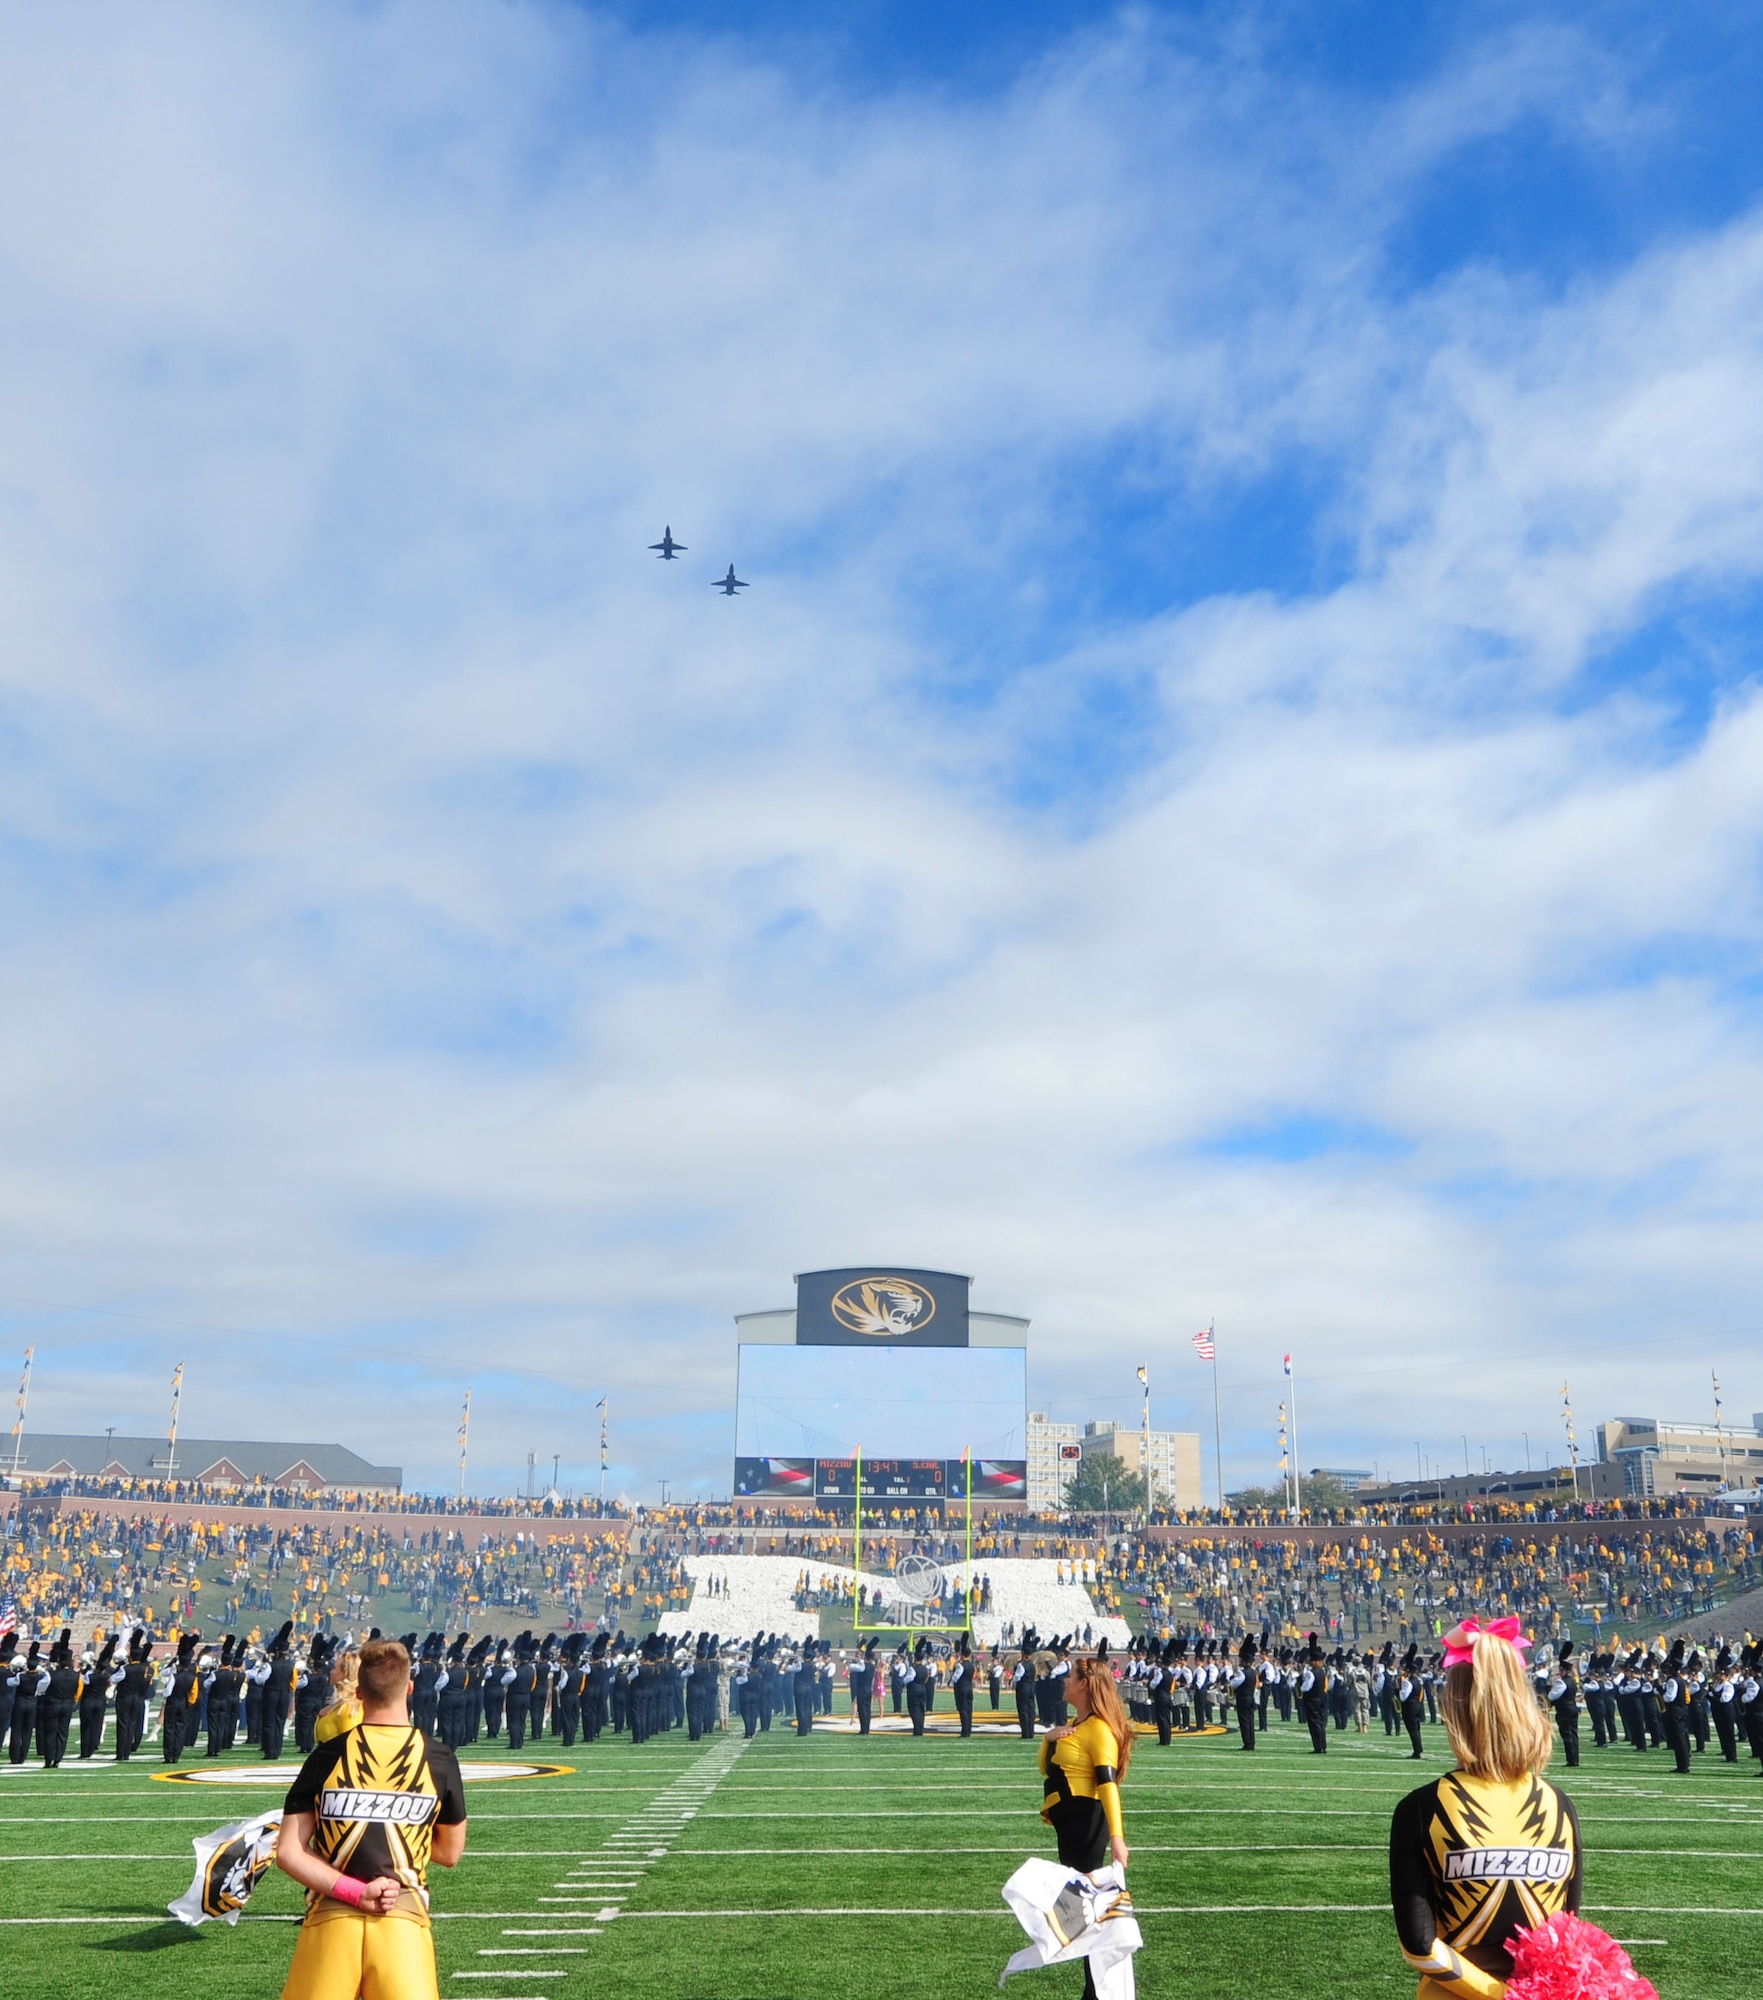 Two T-38 Talons perform a flyover at the University of Missouri football game Oct. 3, 2015, in Columbia, Mo. More than 500 members from Team Whiteman attended the military appreciation game at Mizzou. (U.S. Air Force photo by Airman 1st Class Jazmin Smith/Released)